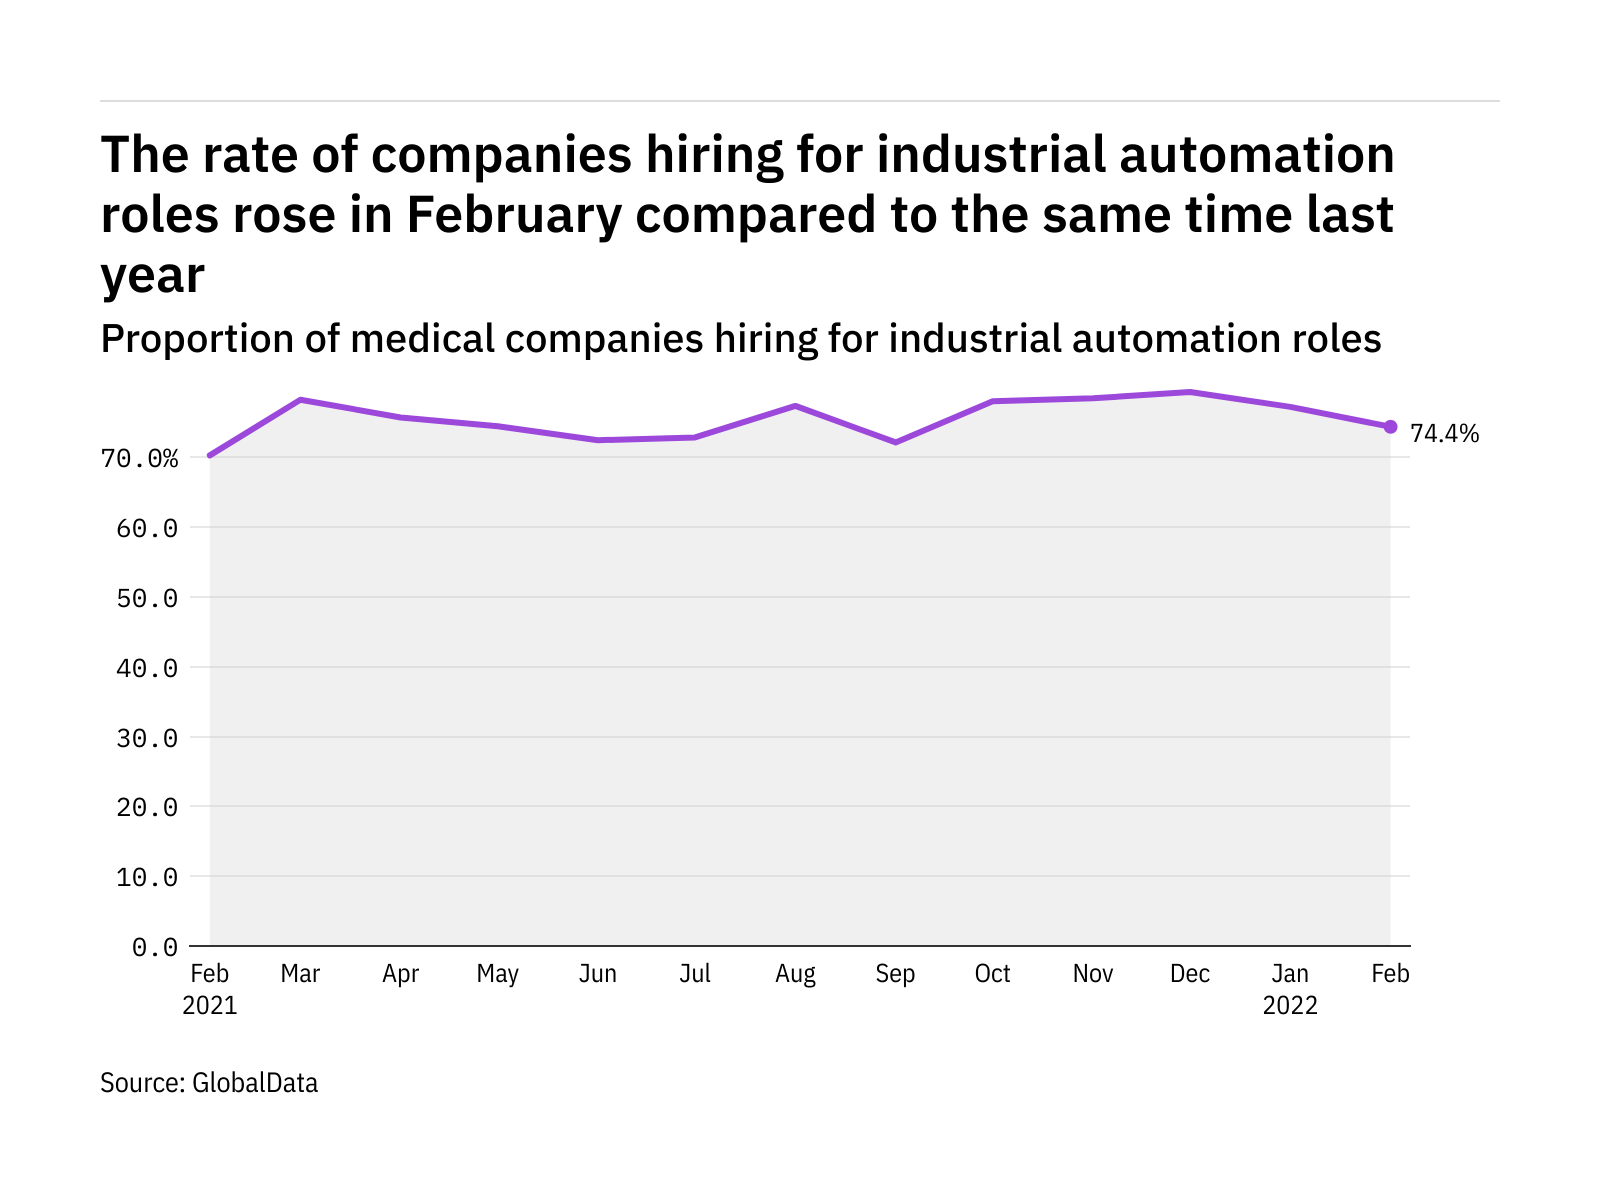 Industrial automation hiring levels in the medical industry rose in February 2022